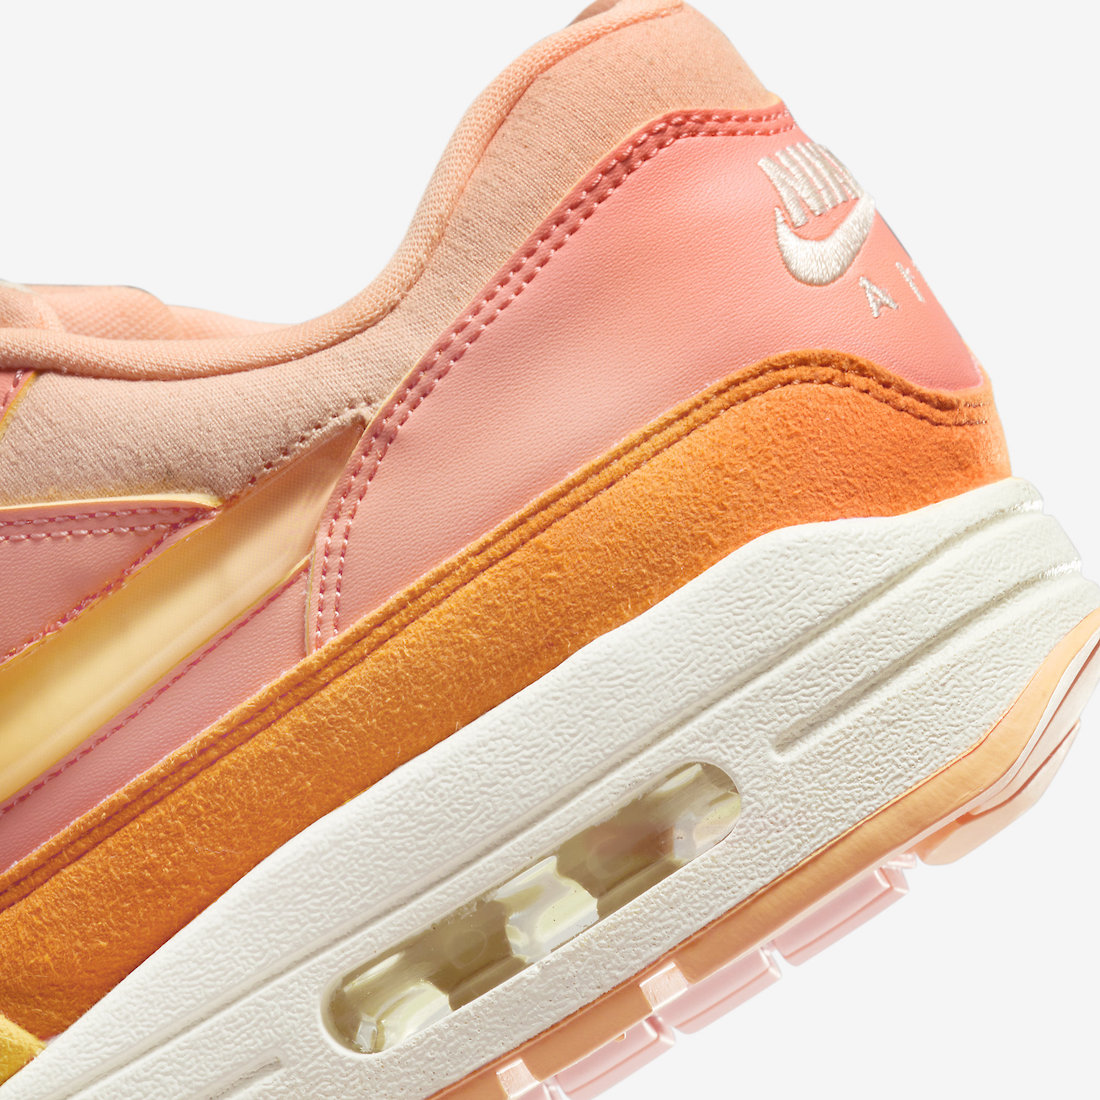 Nike Air Max 1 Puerto Rico Orange Frost FD6955 800 Release Date 7